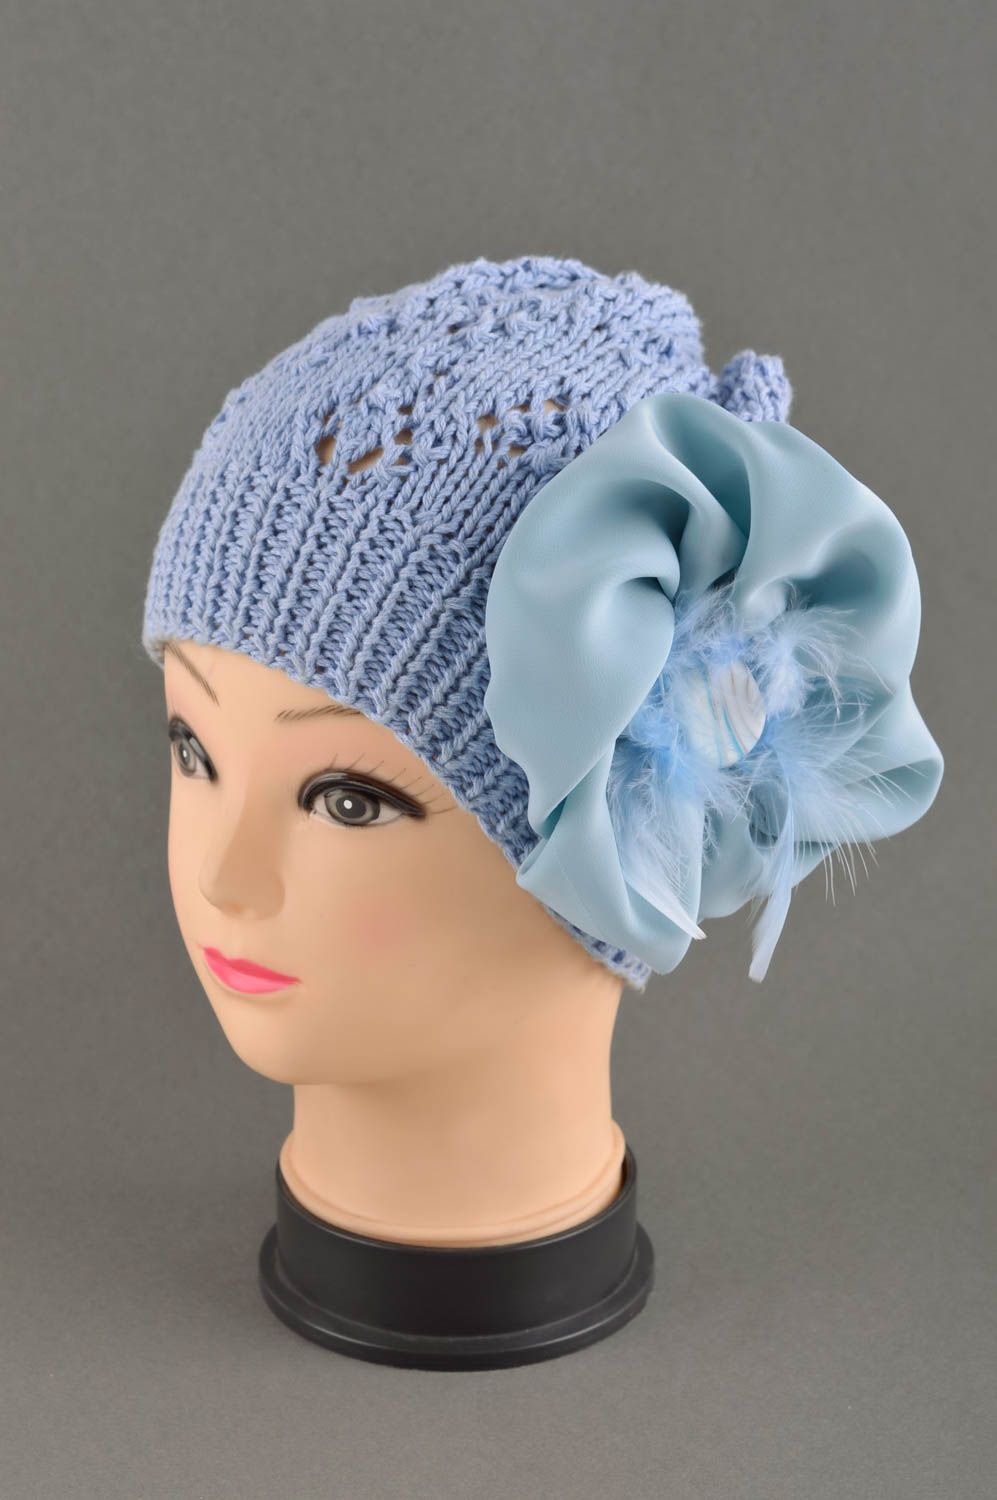 Handmade ladies hat knitted hat designer accessories fashion hats gifts for her photo 1